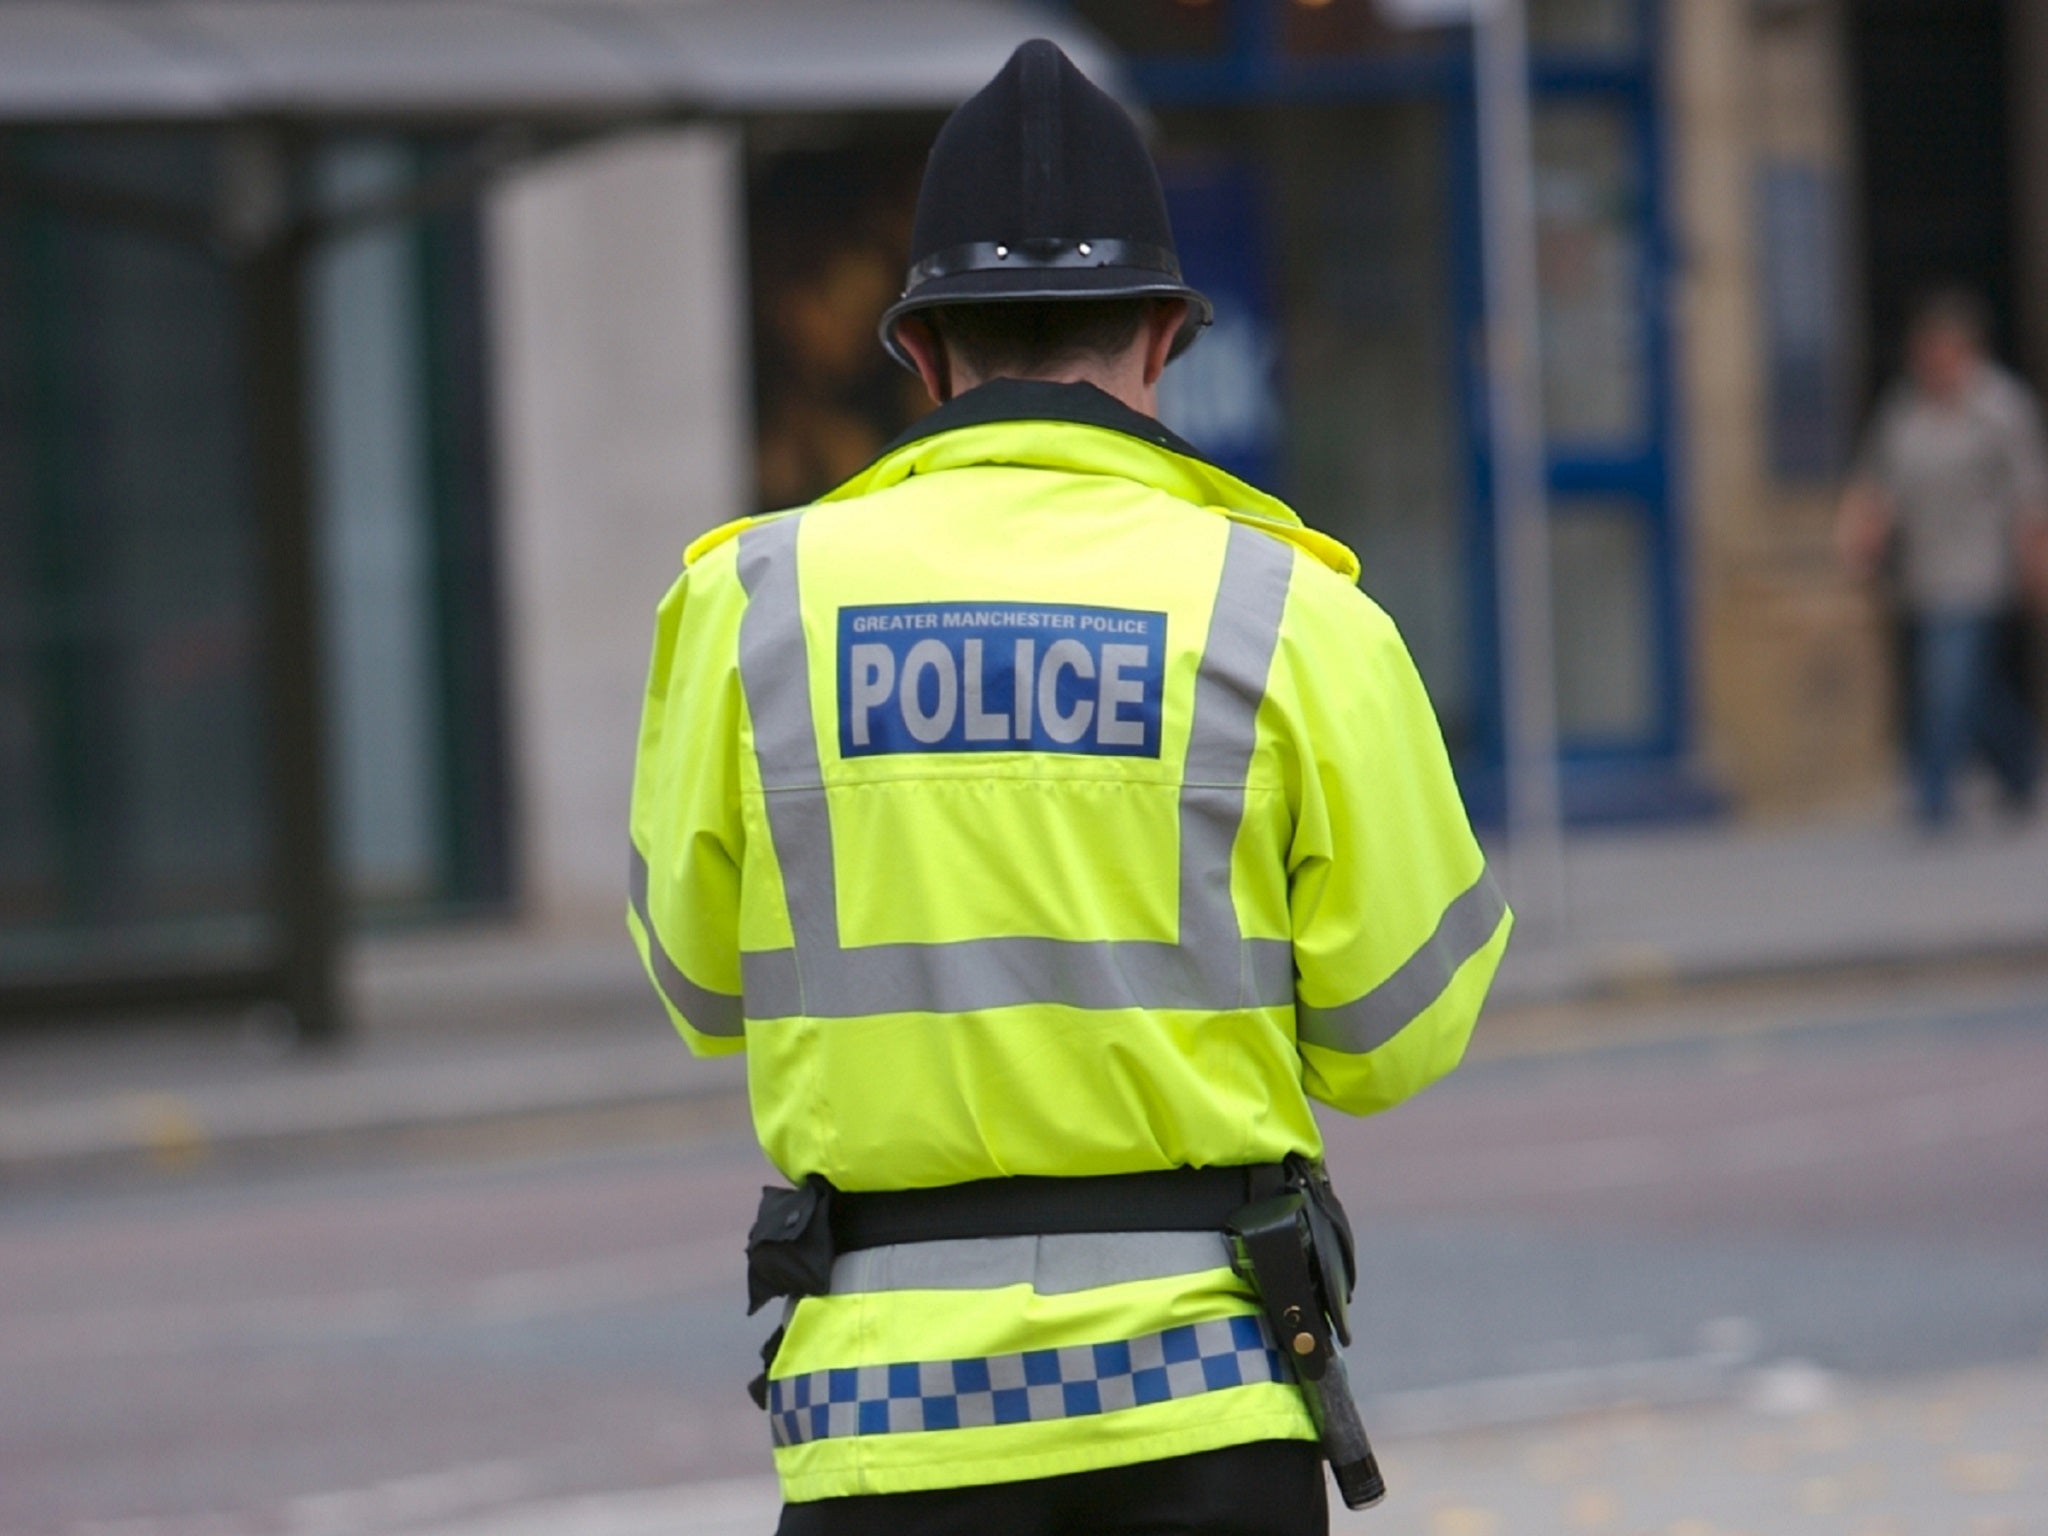 Reports of rape to police have soared in the past recorded quarter